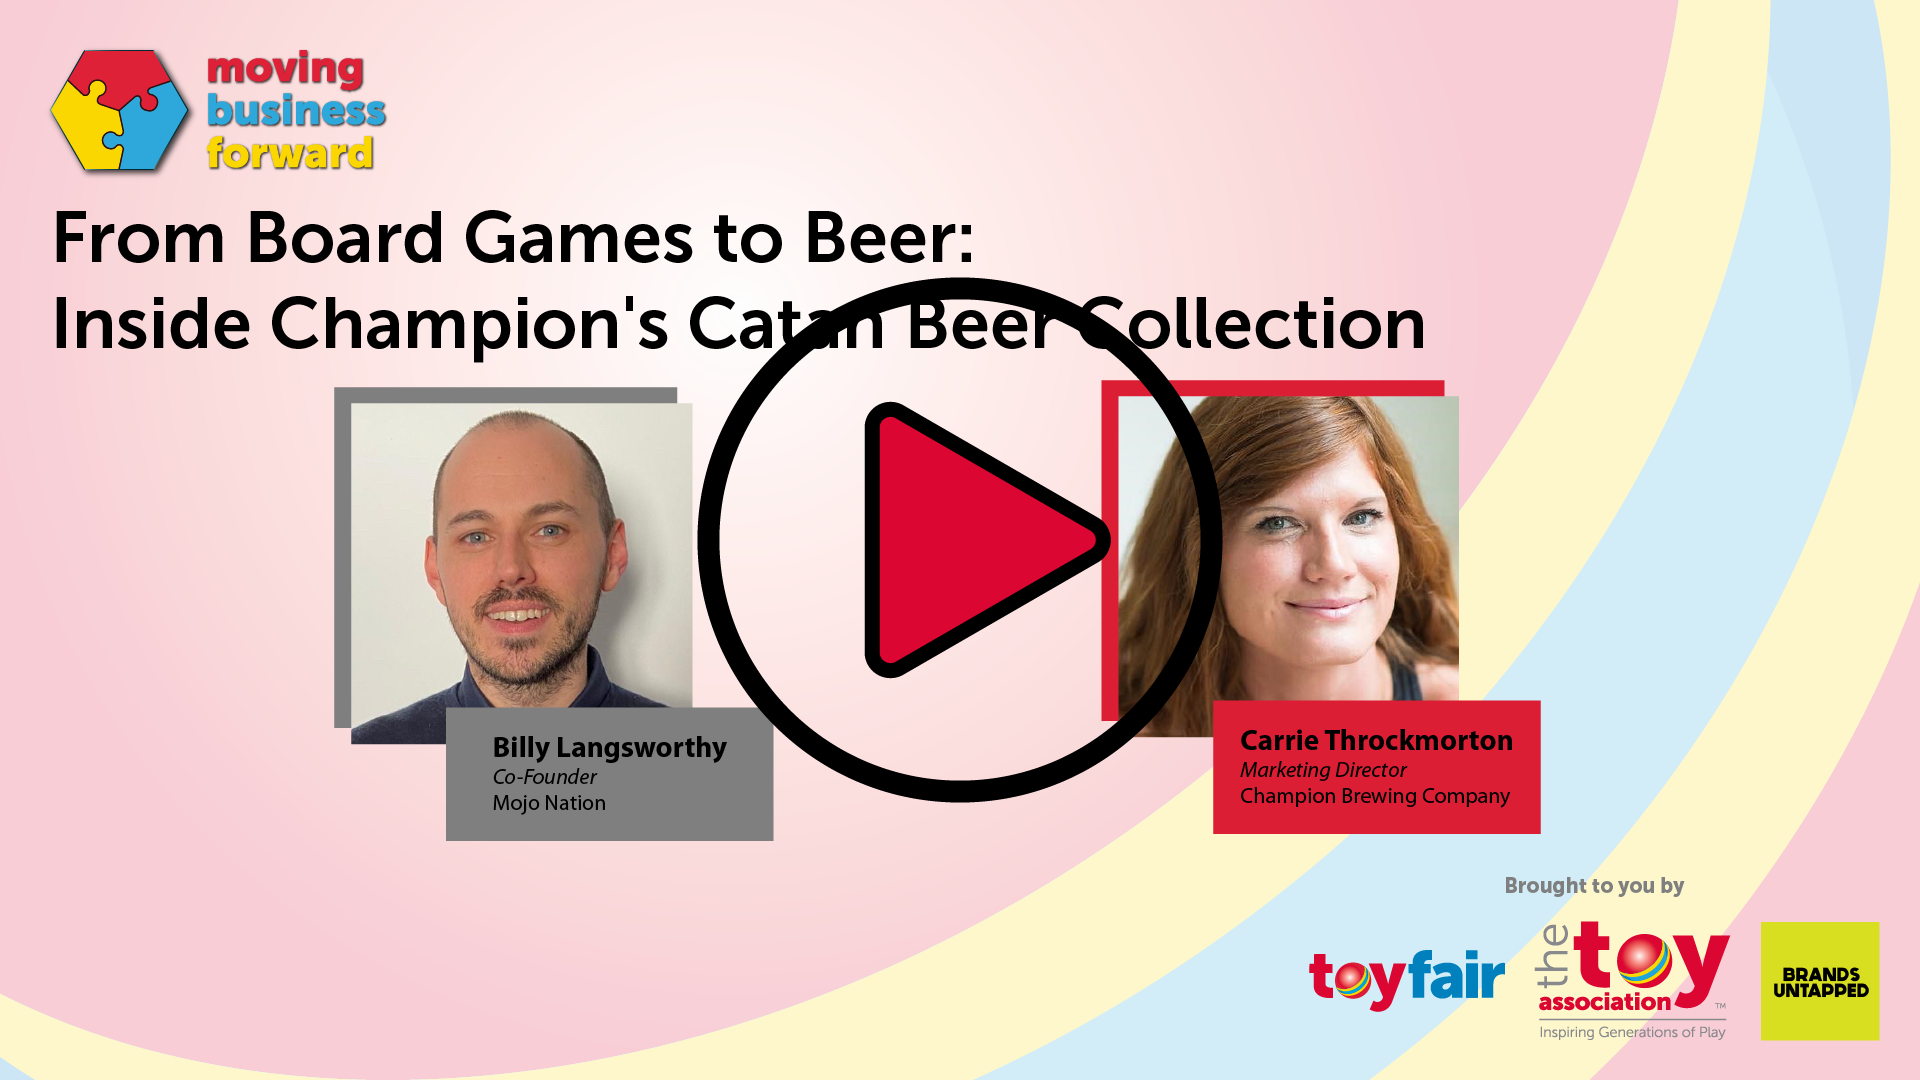 From Board Games to Beer: Inside Champion's Catan Beer Collection